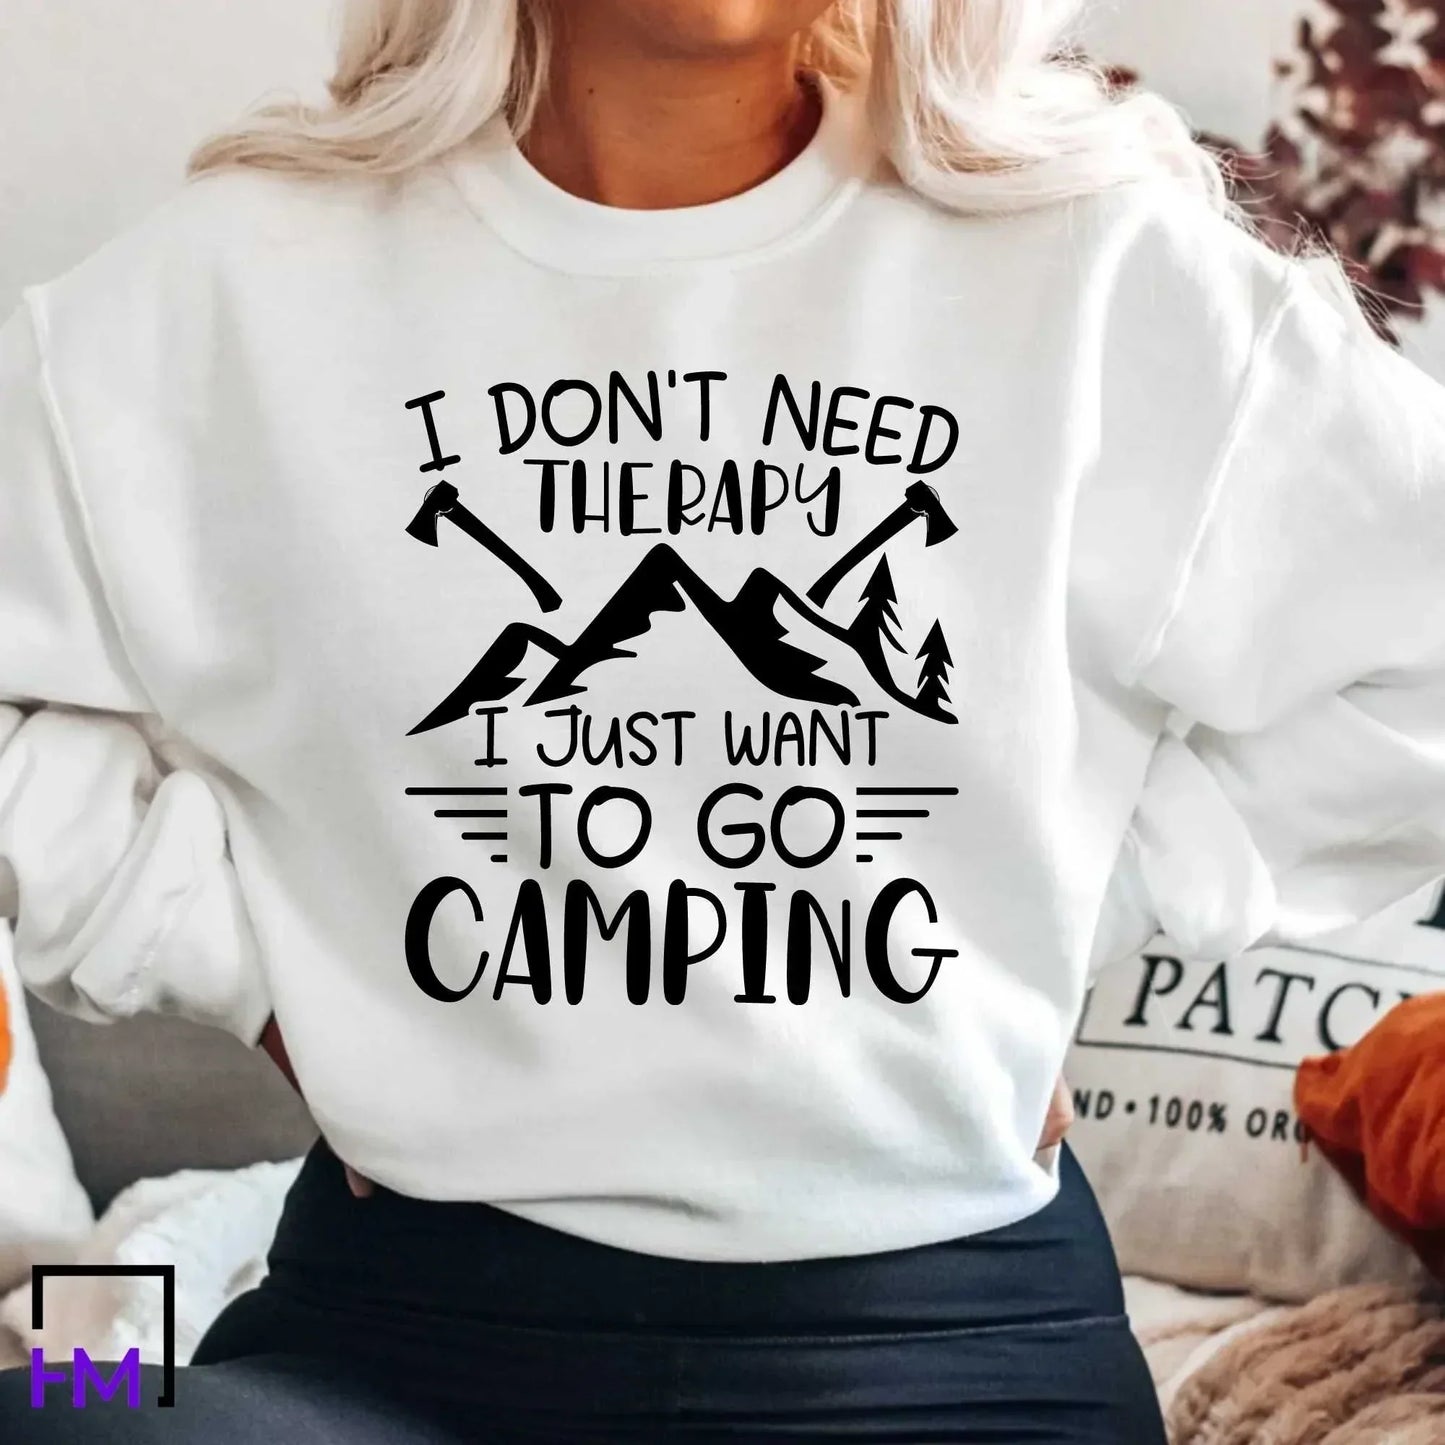 Camping Therapy Shirt, Happy Camper, Adventure Time, Camper Gifts for Women, Nature Lover Sweatshirt, Camping Presents, Mountain Hiking Tee HMDesignStudioUS